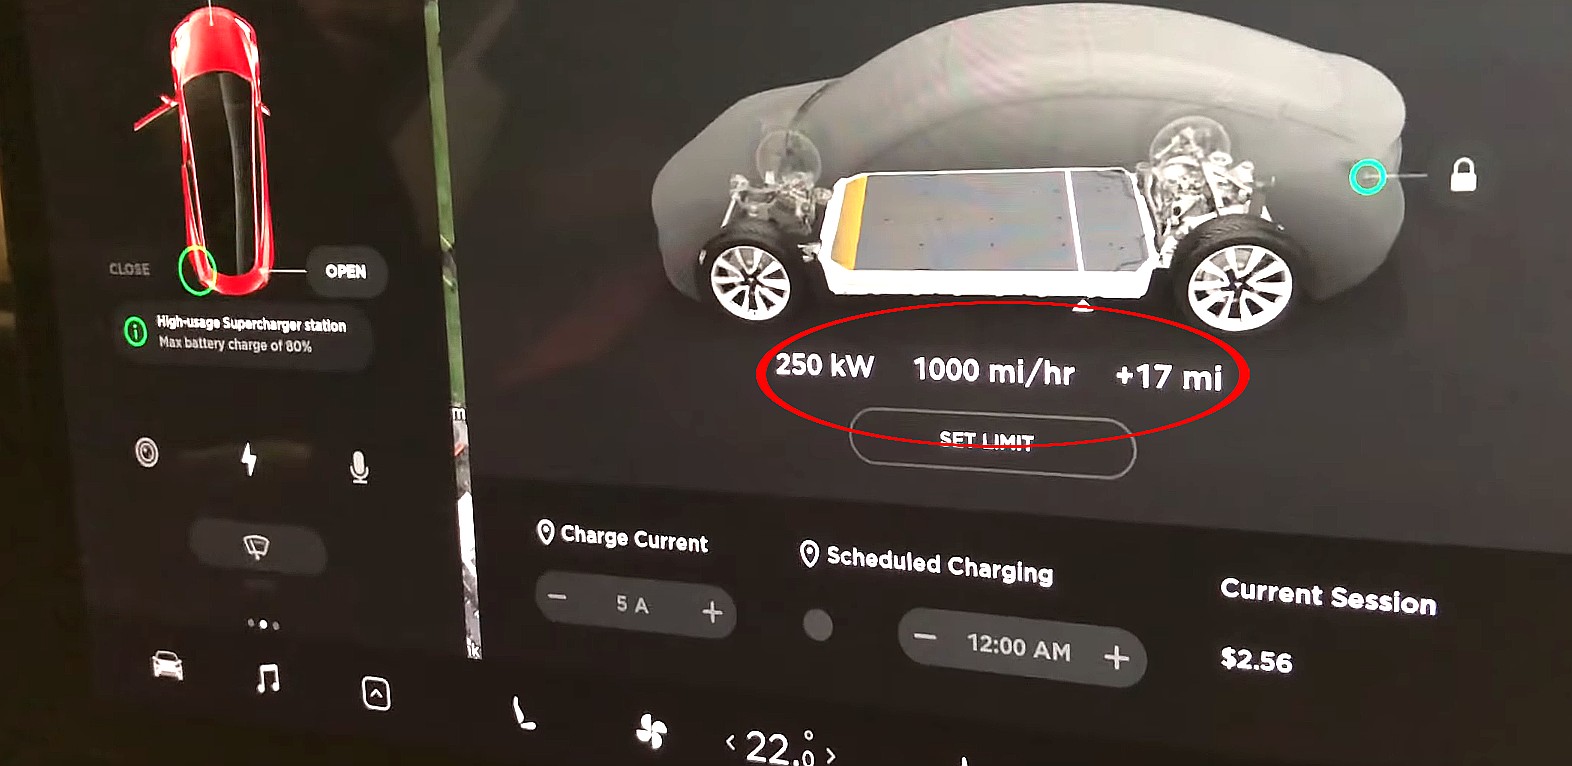 First look at Tesla’s next-generation Supercharger V3 in action